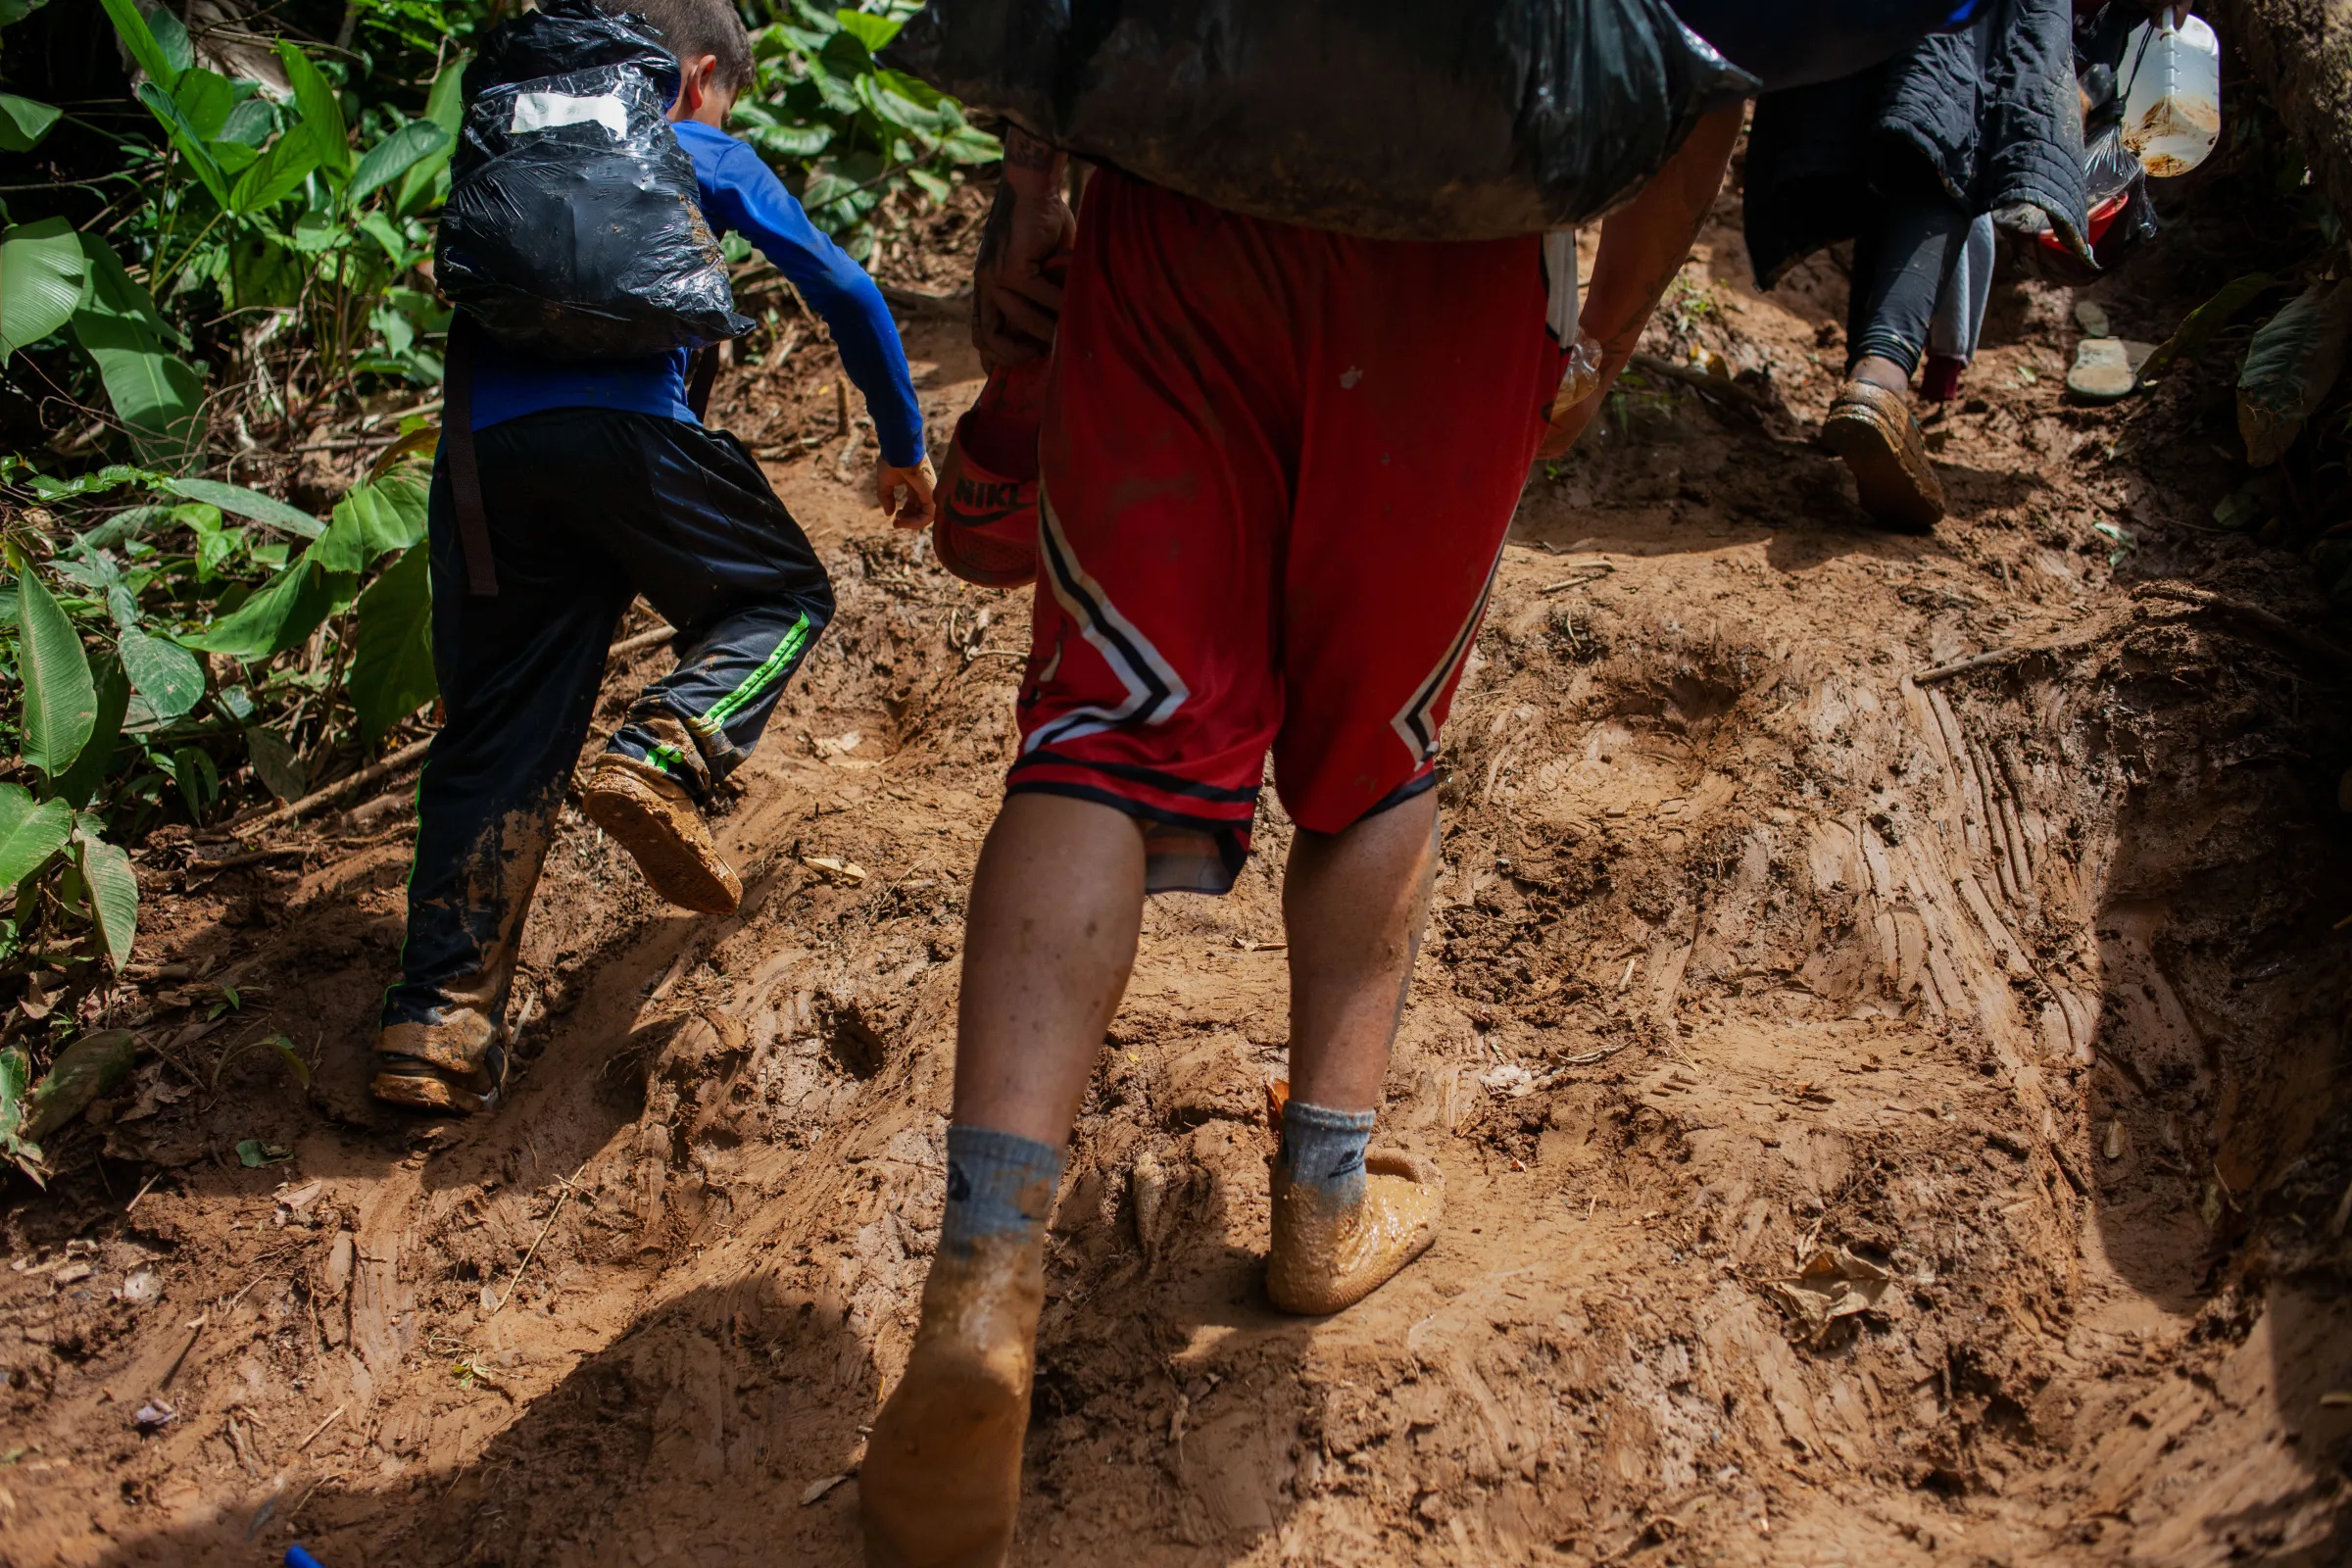 A Venezuelan migrant walks in socks alongside a child as they walk along a muddy path through the Colombian jungle bordering neighboring Panama at the start of a seven-day trek. Darién Gap, Colombia, July 27, 2022. Thomson Reuters Foundation/Fabio Cuttica